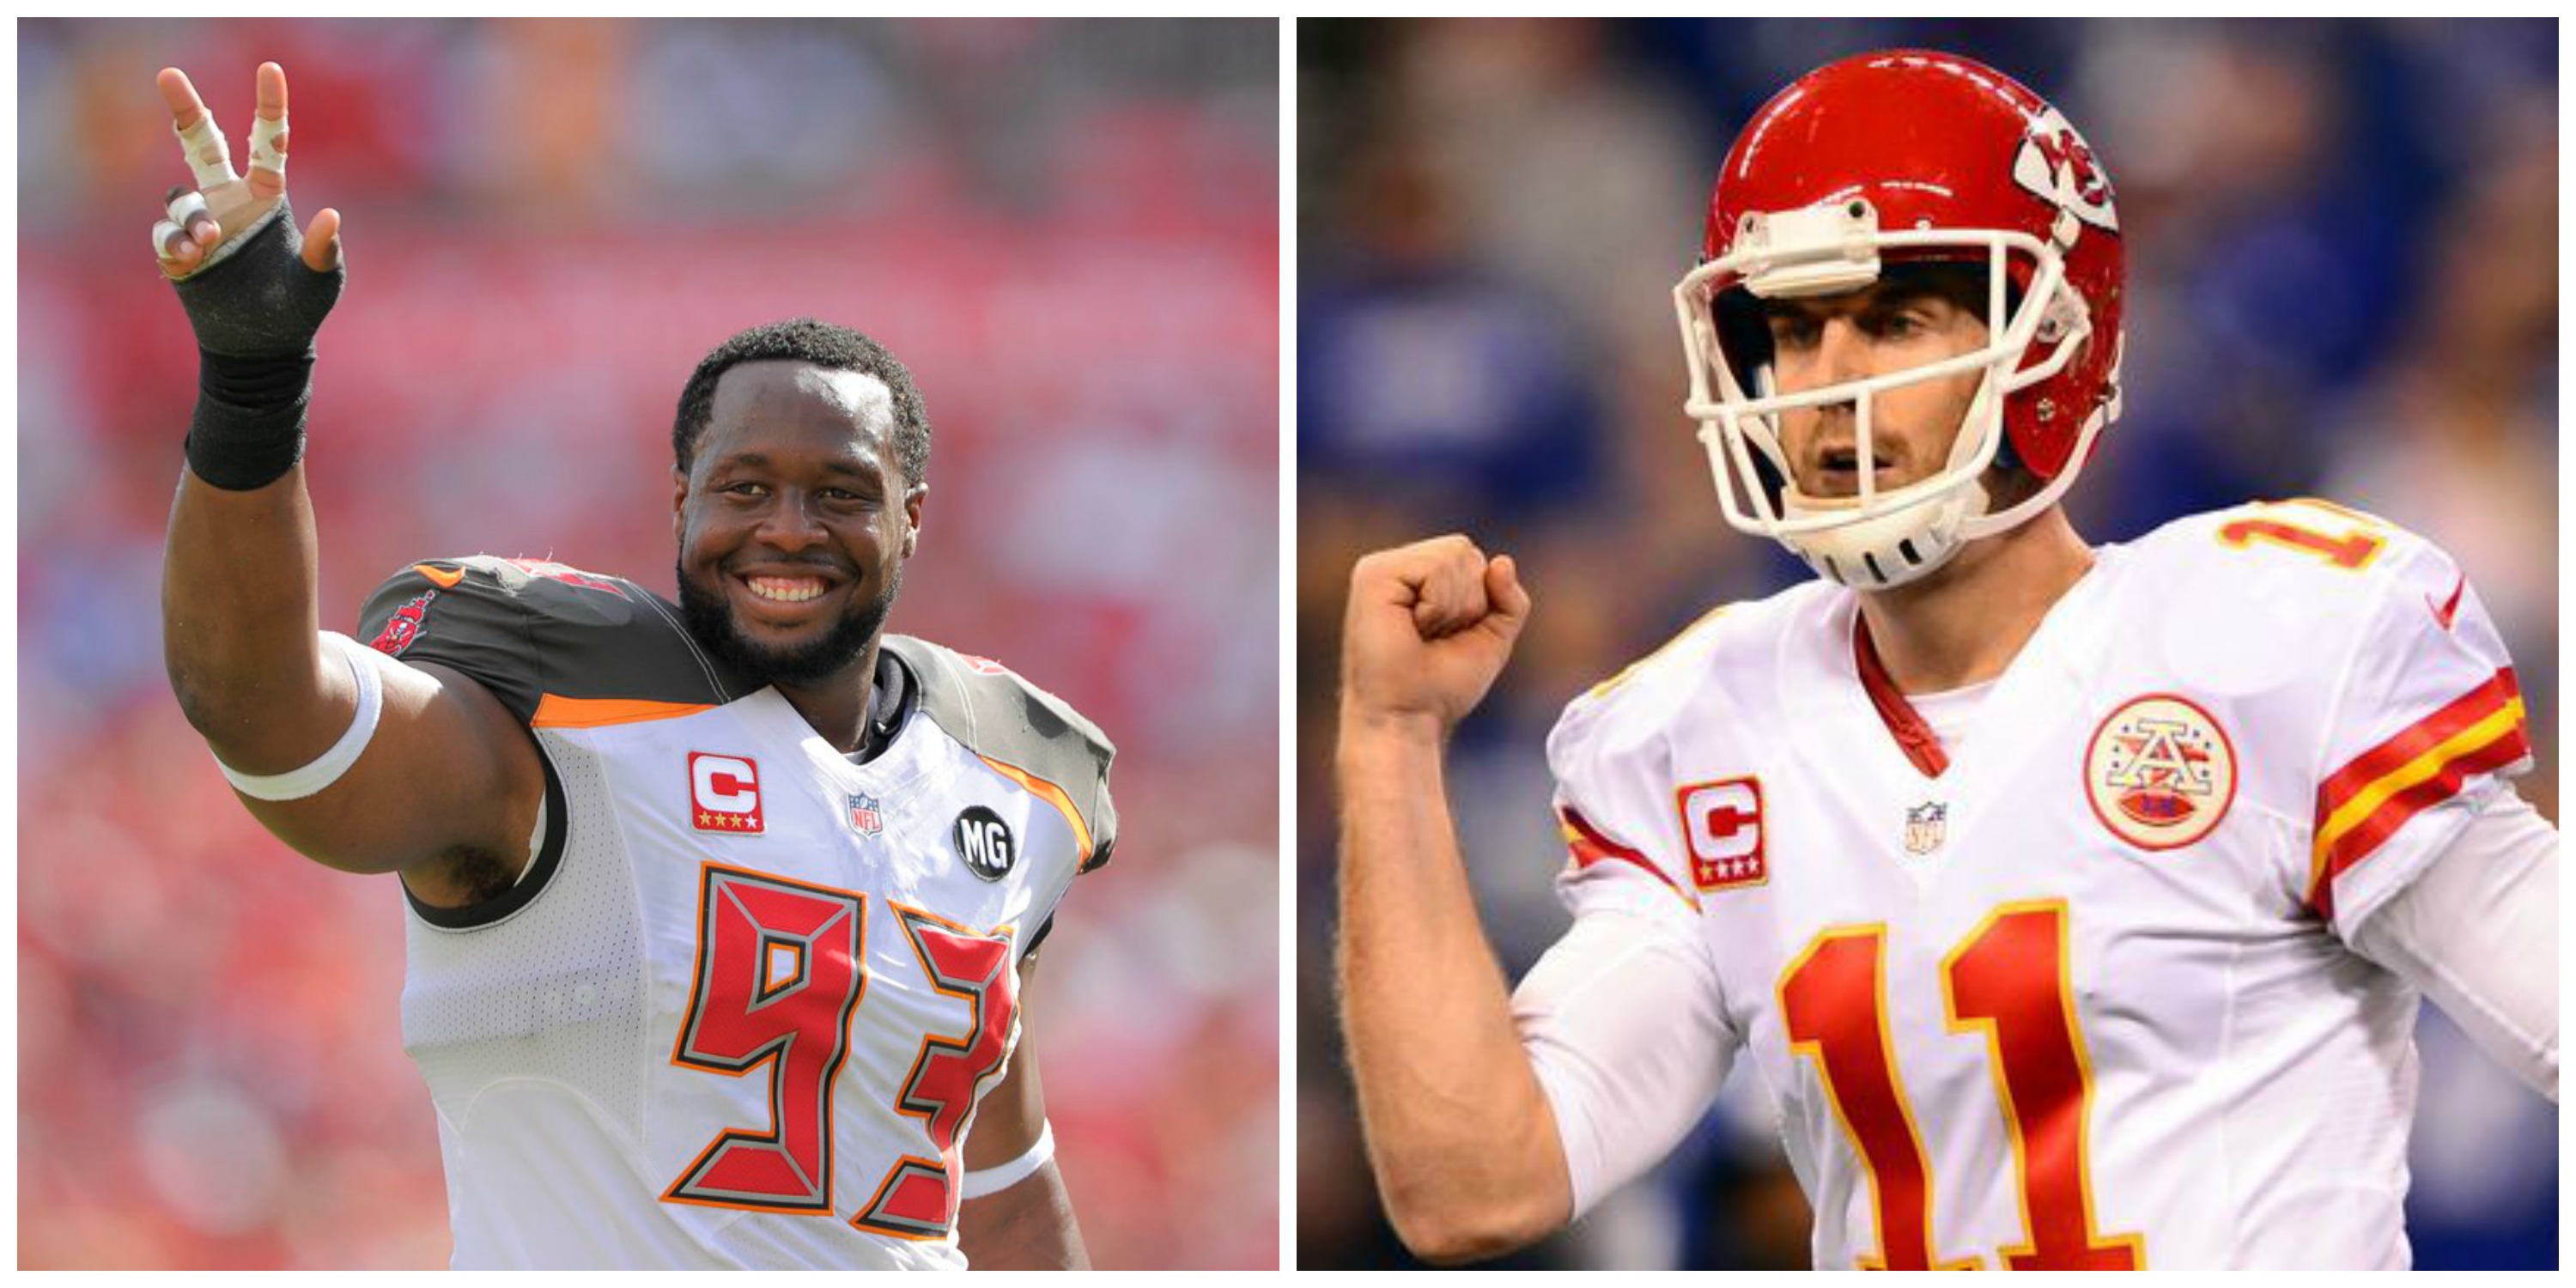 This Week's Spotlight on the Positive is on: Gerald McCoy & Alex Smith